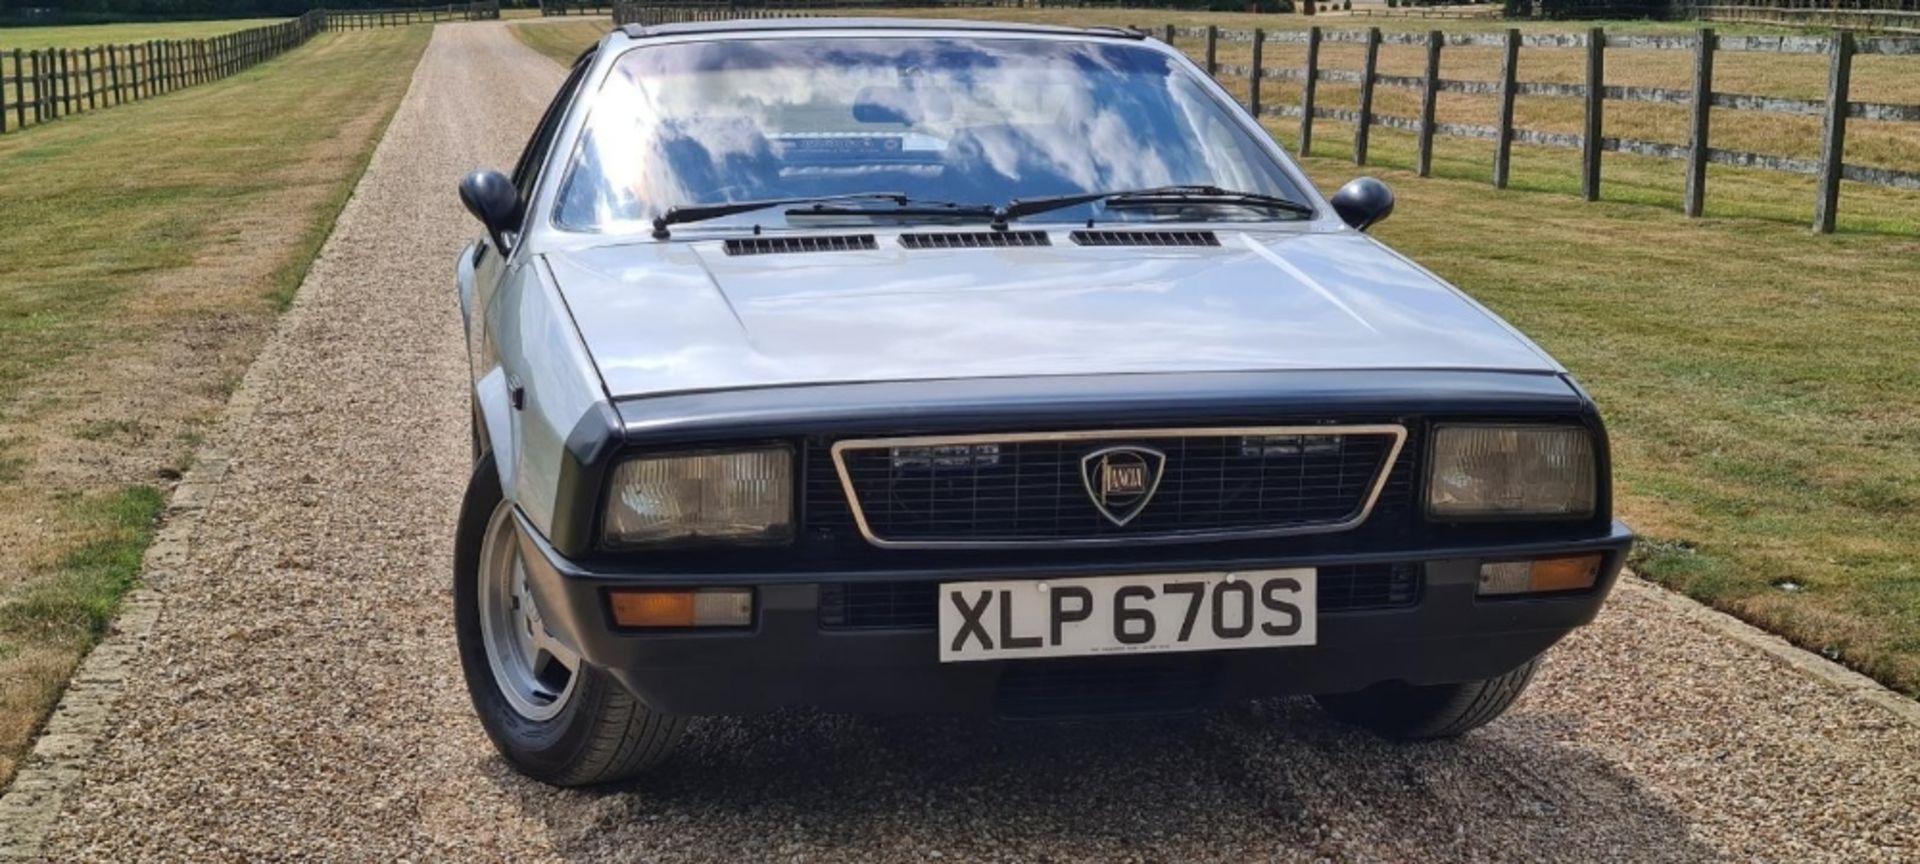 1978 LANCIA MONTECARLO SPIDER Registration Number: XLP 670S Chassis Number: TBA Recorded Mileage: - Image 2 of 12